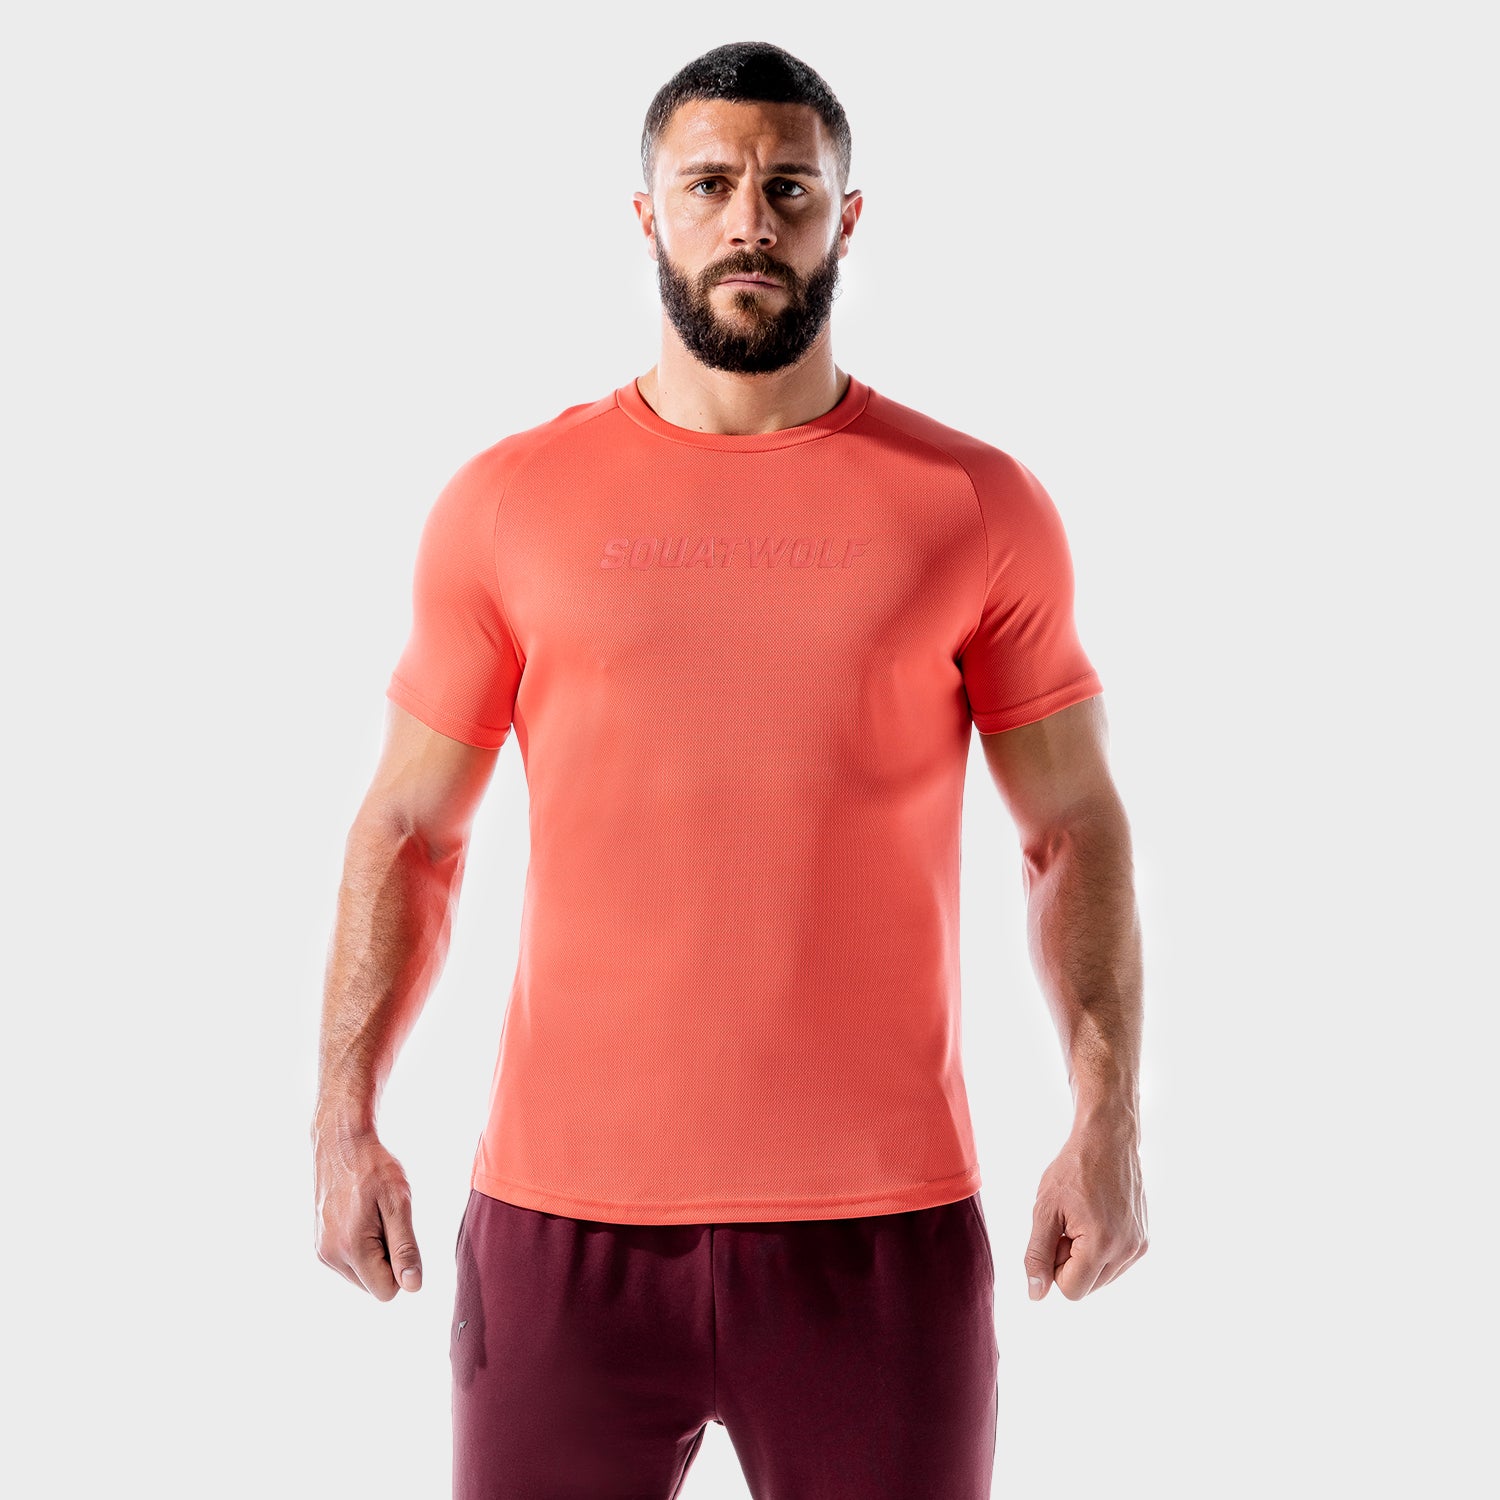 squatwolf-workout-shirts-for-men-lab-360-recycled-mesh-tee-hot-coral-gym-wear